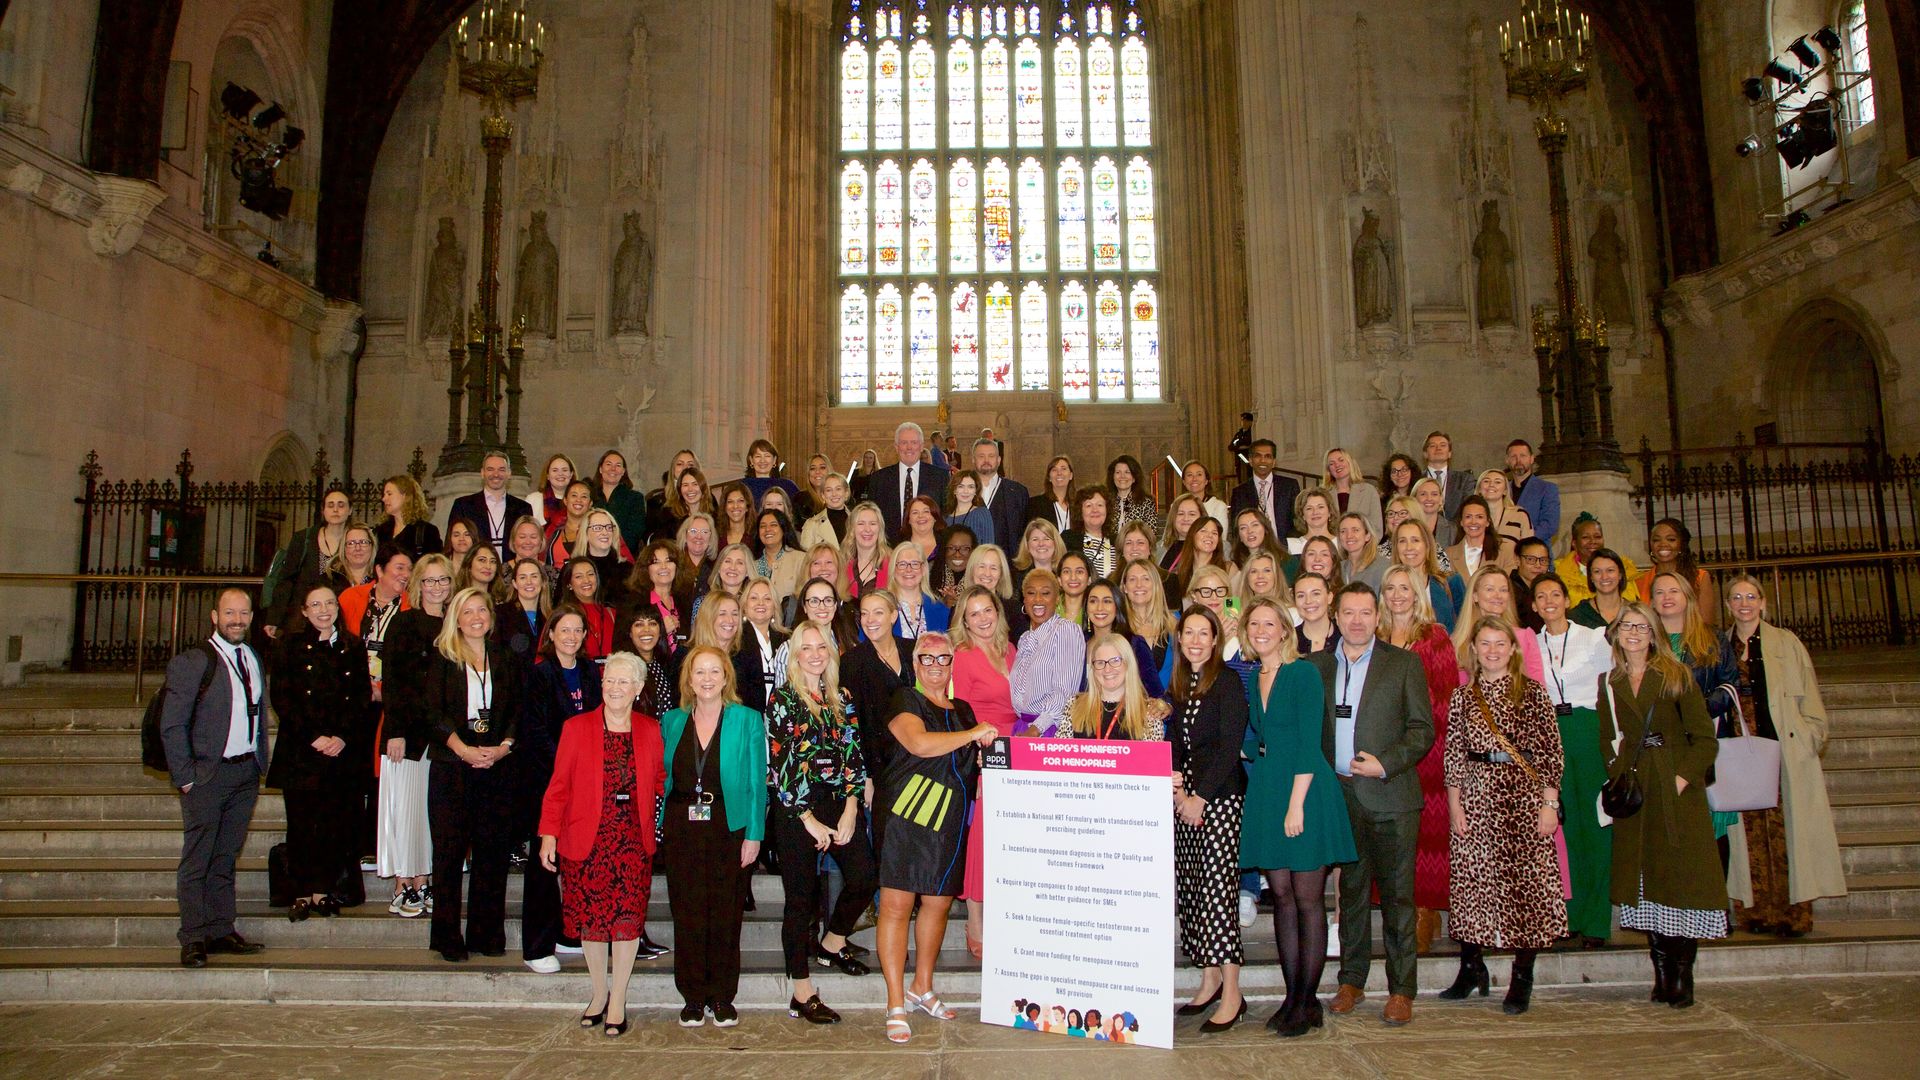 Menopause campaigners join HELLO! at Parliament